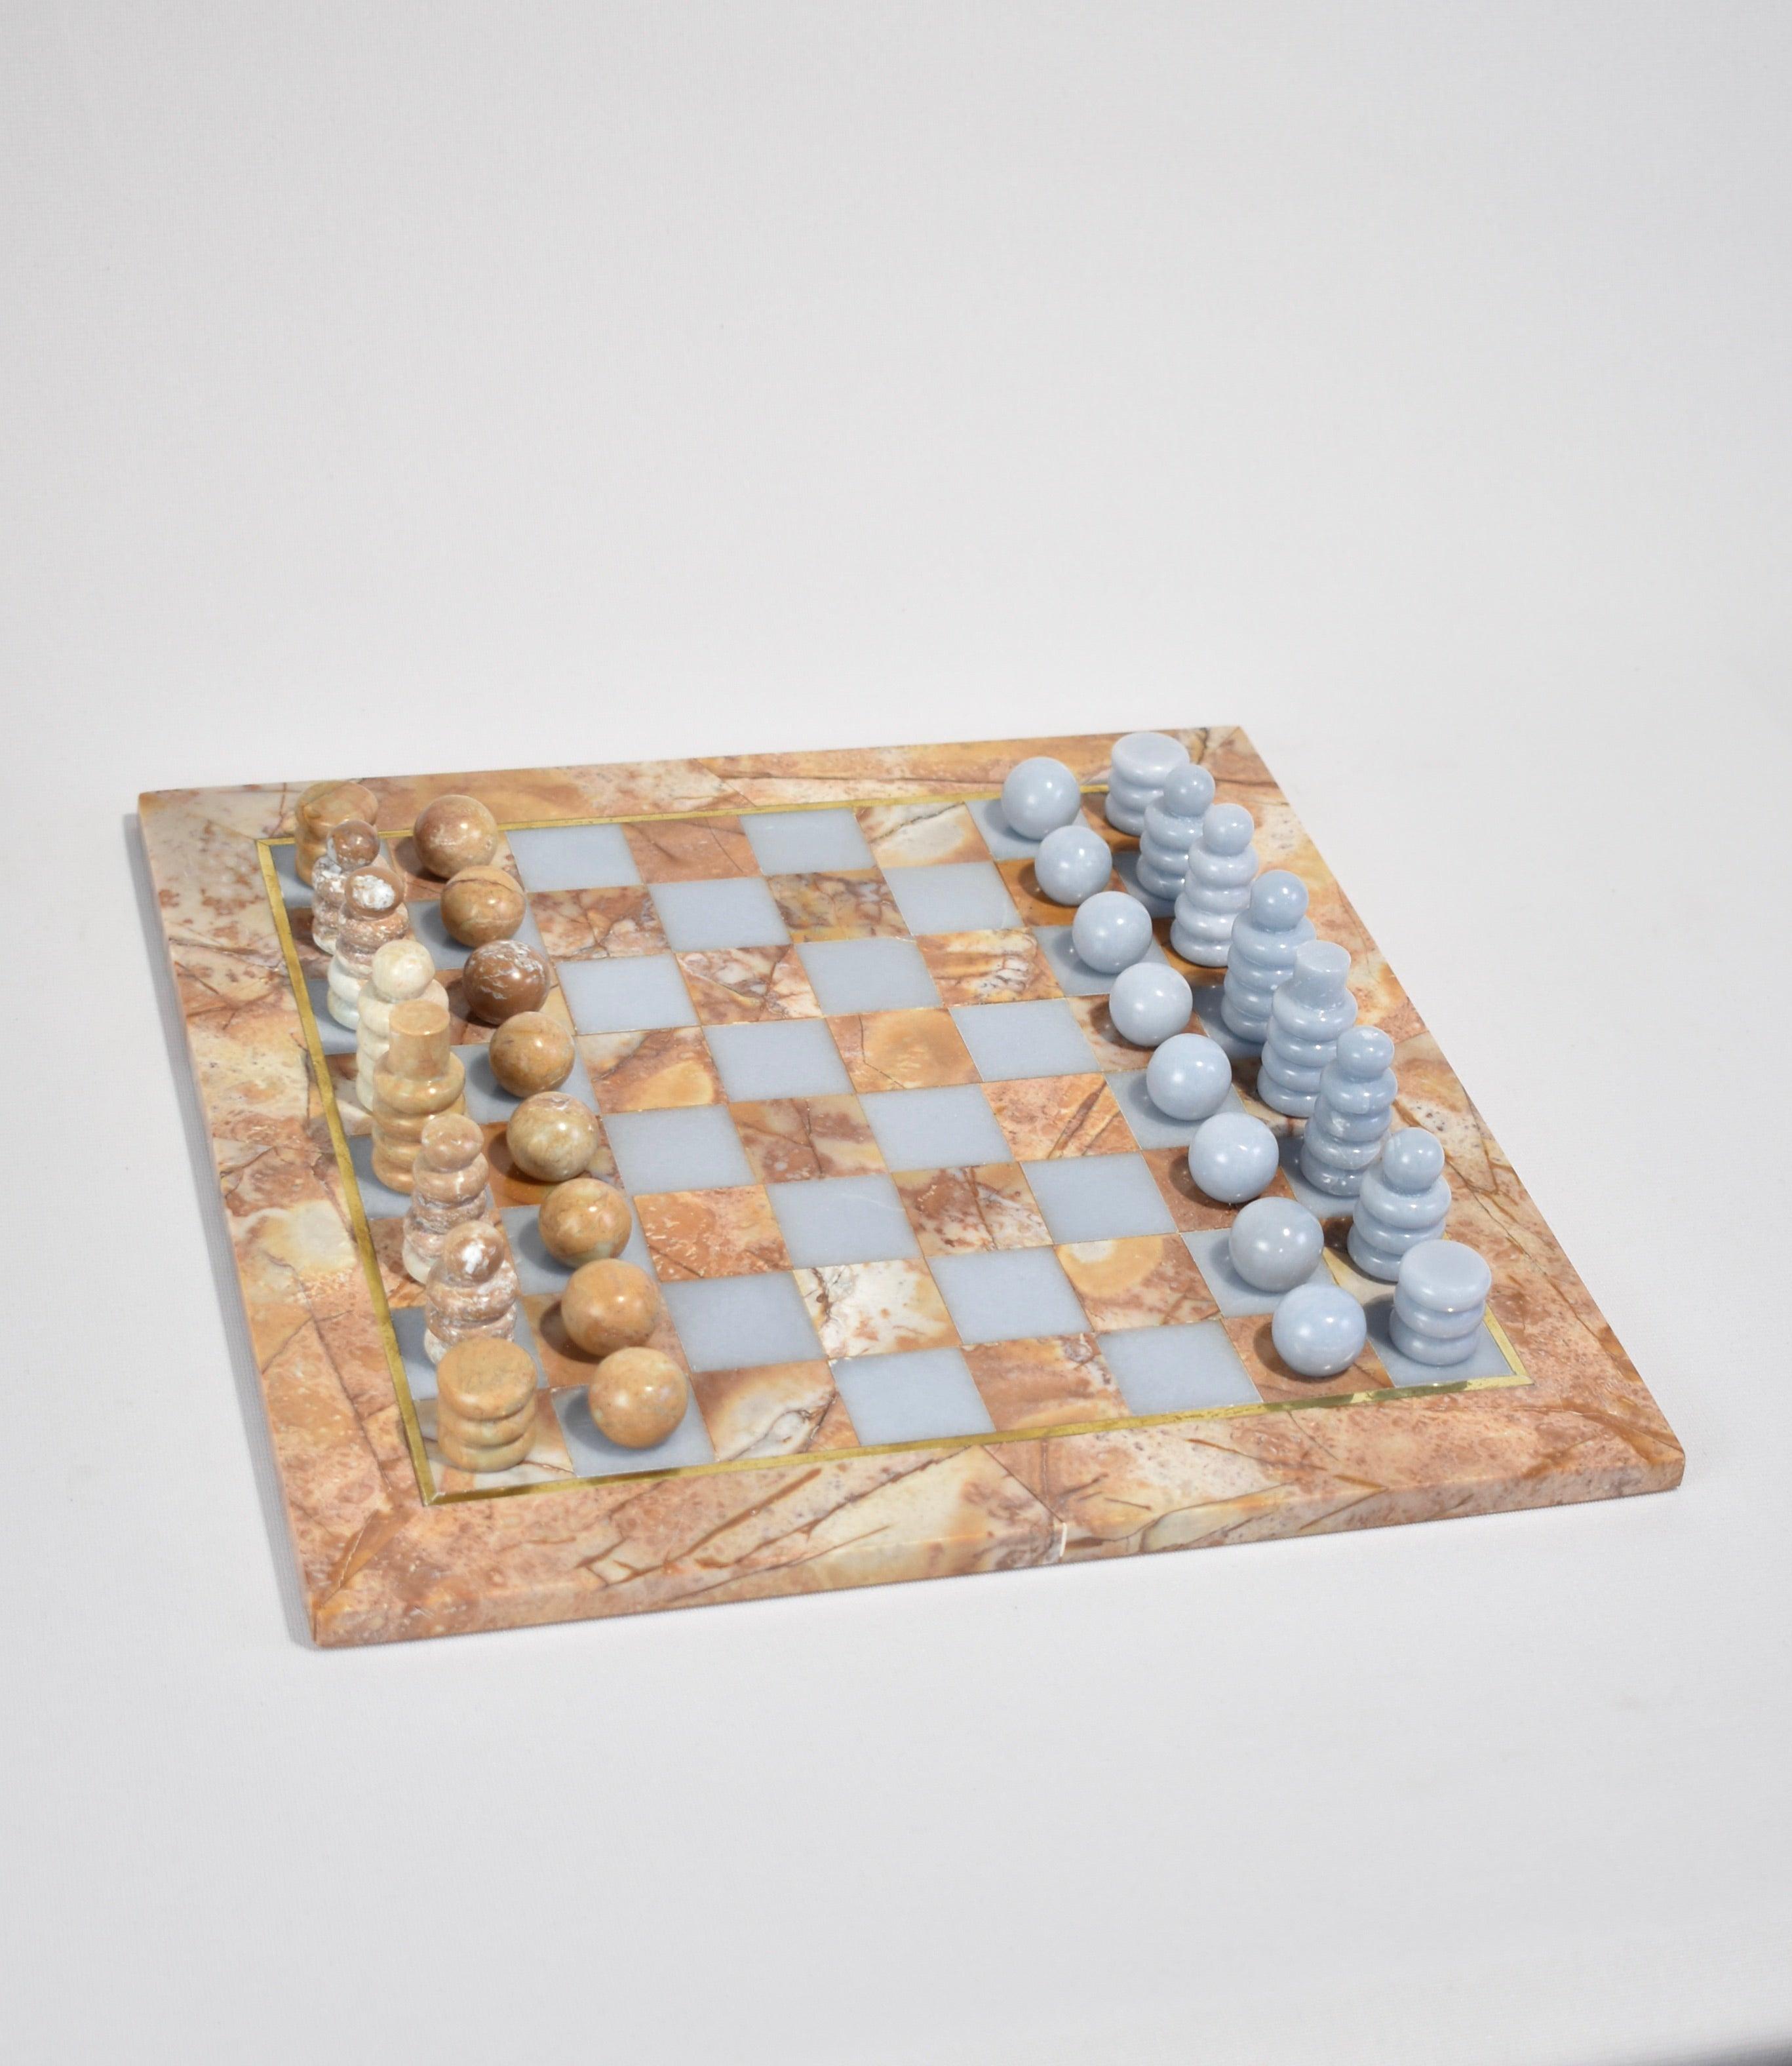 Introducing the chess set by Casa Shop, the second design in our stone collection handmade by artisans in Perú. 

Each set features hand-carved pieces and a board in Soapstone and Soft Blue Celestine. The board is accented in brass inlay and comes